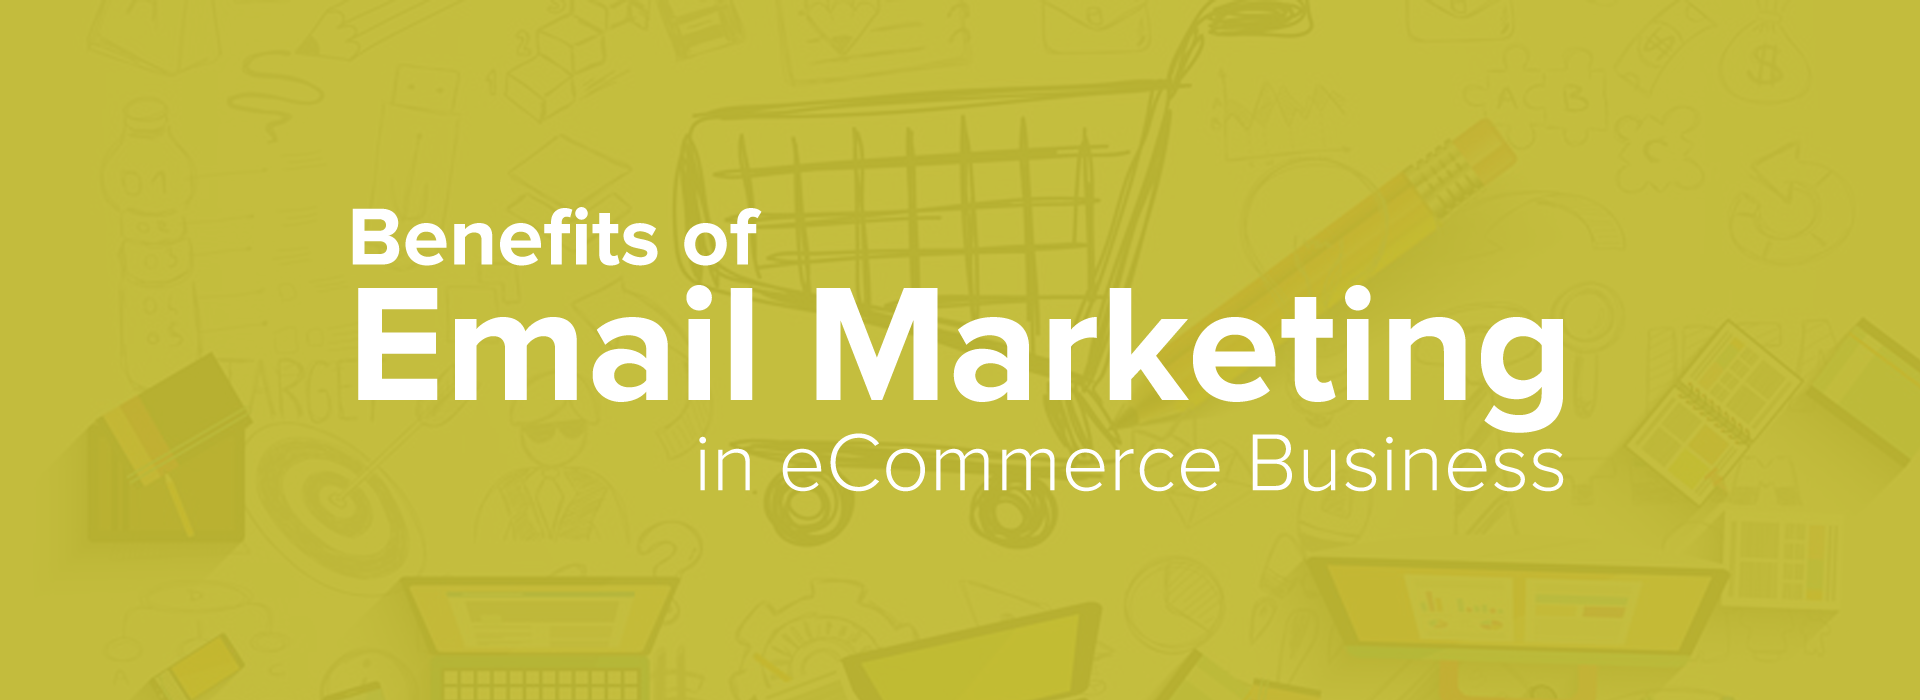 benefits-of-email-marketing-in-ecommerce-business-ecommfy